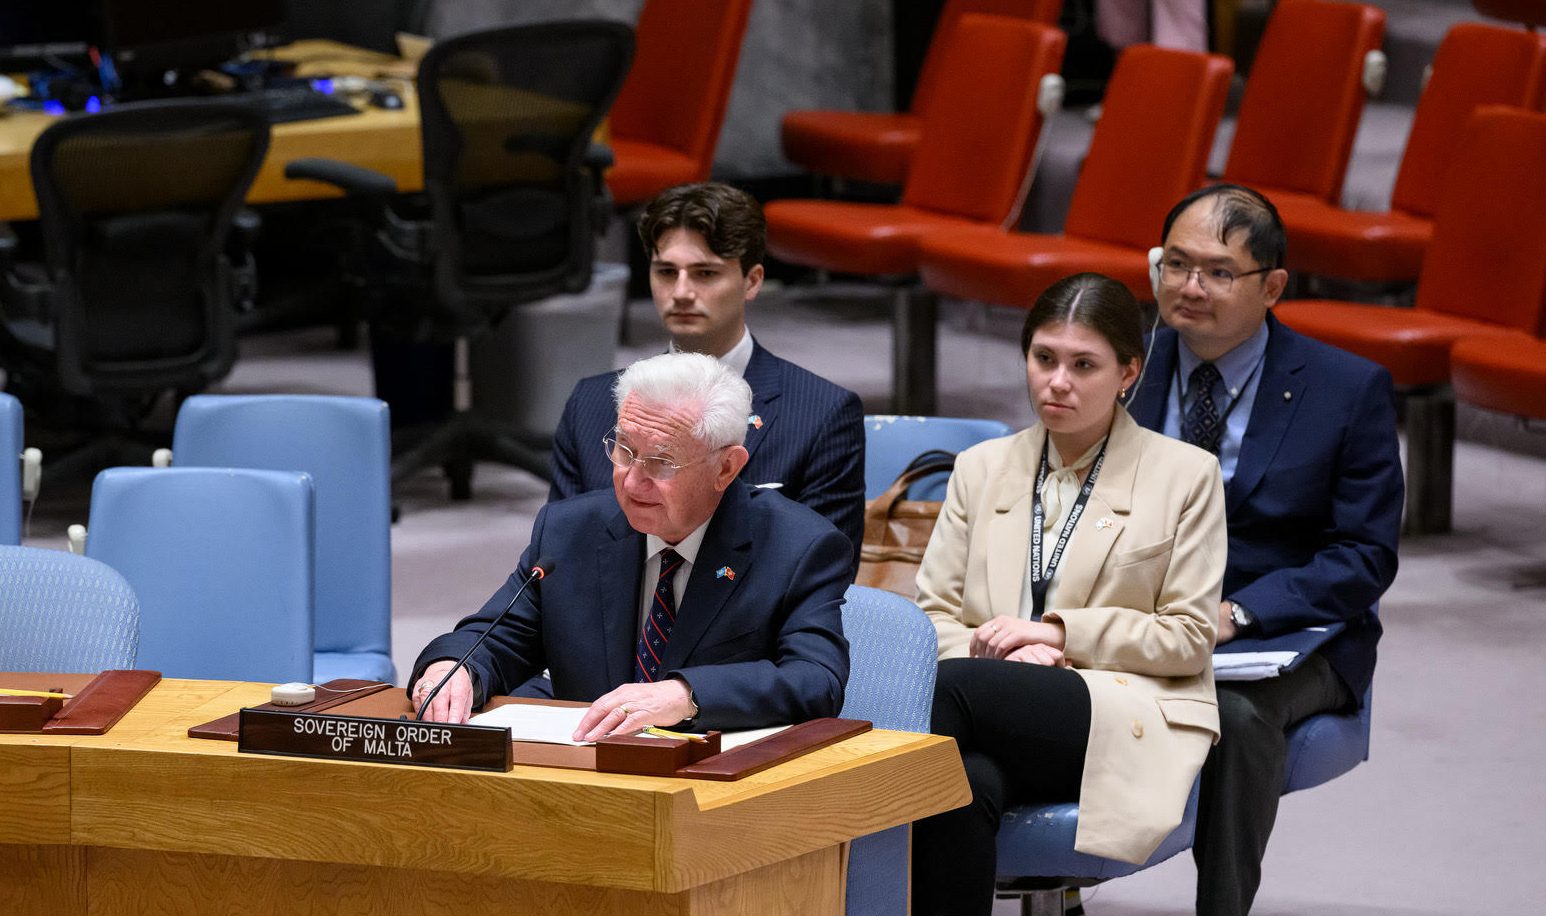 H.E. Ambassador Beresford-Hill addressed the Security Council concerning the Protection of Civilians in Armed Conflict